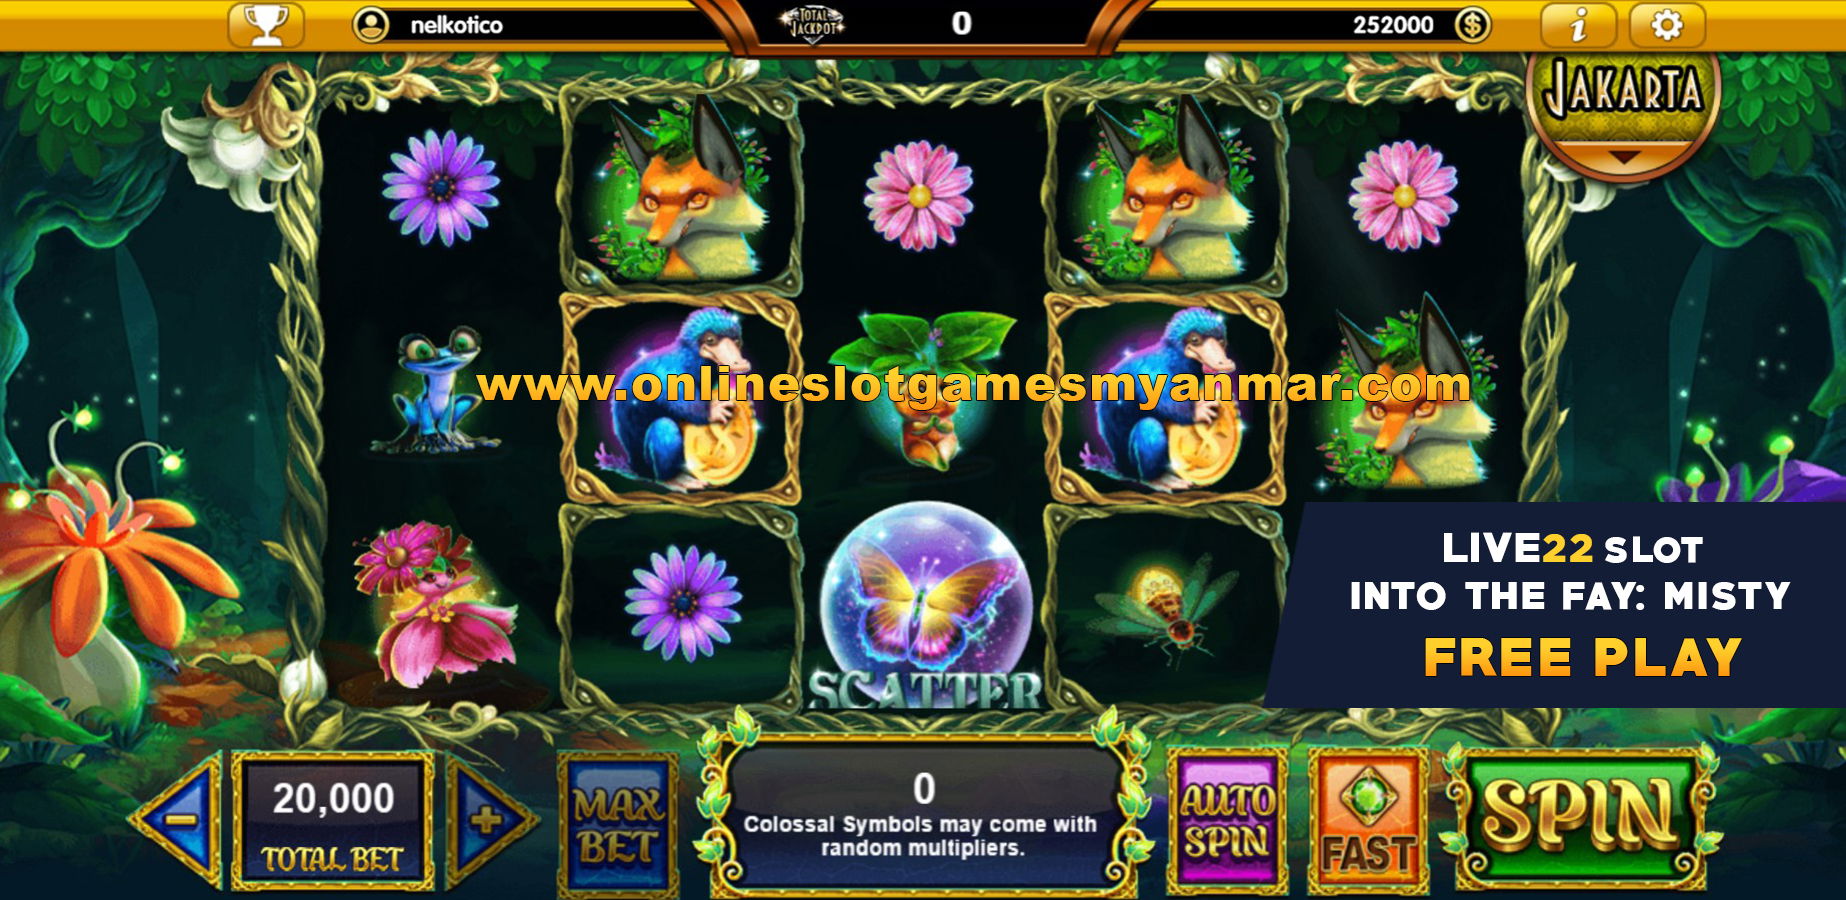 Free Play 3 Into The Fay Misty Slot Game - Live22 Myanmar (2)